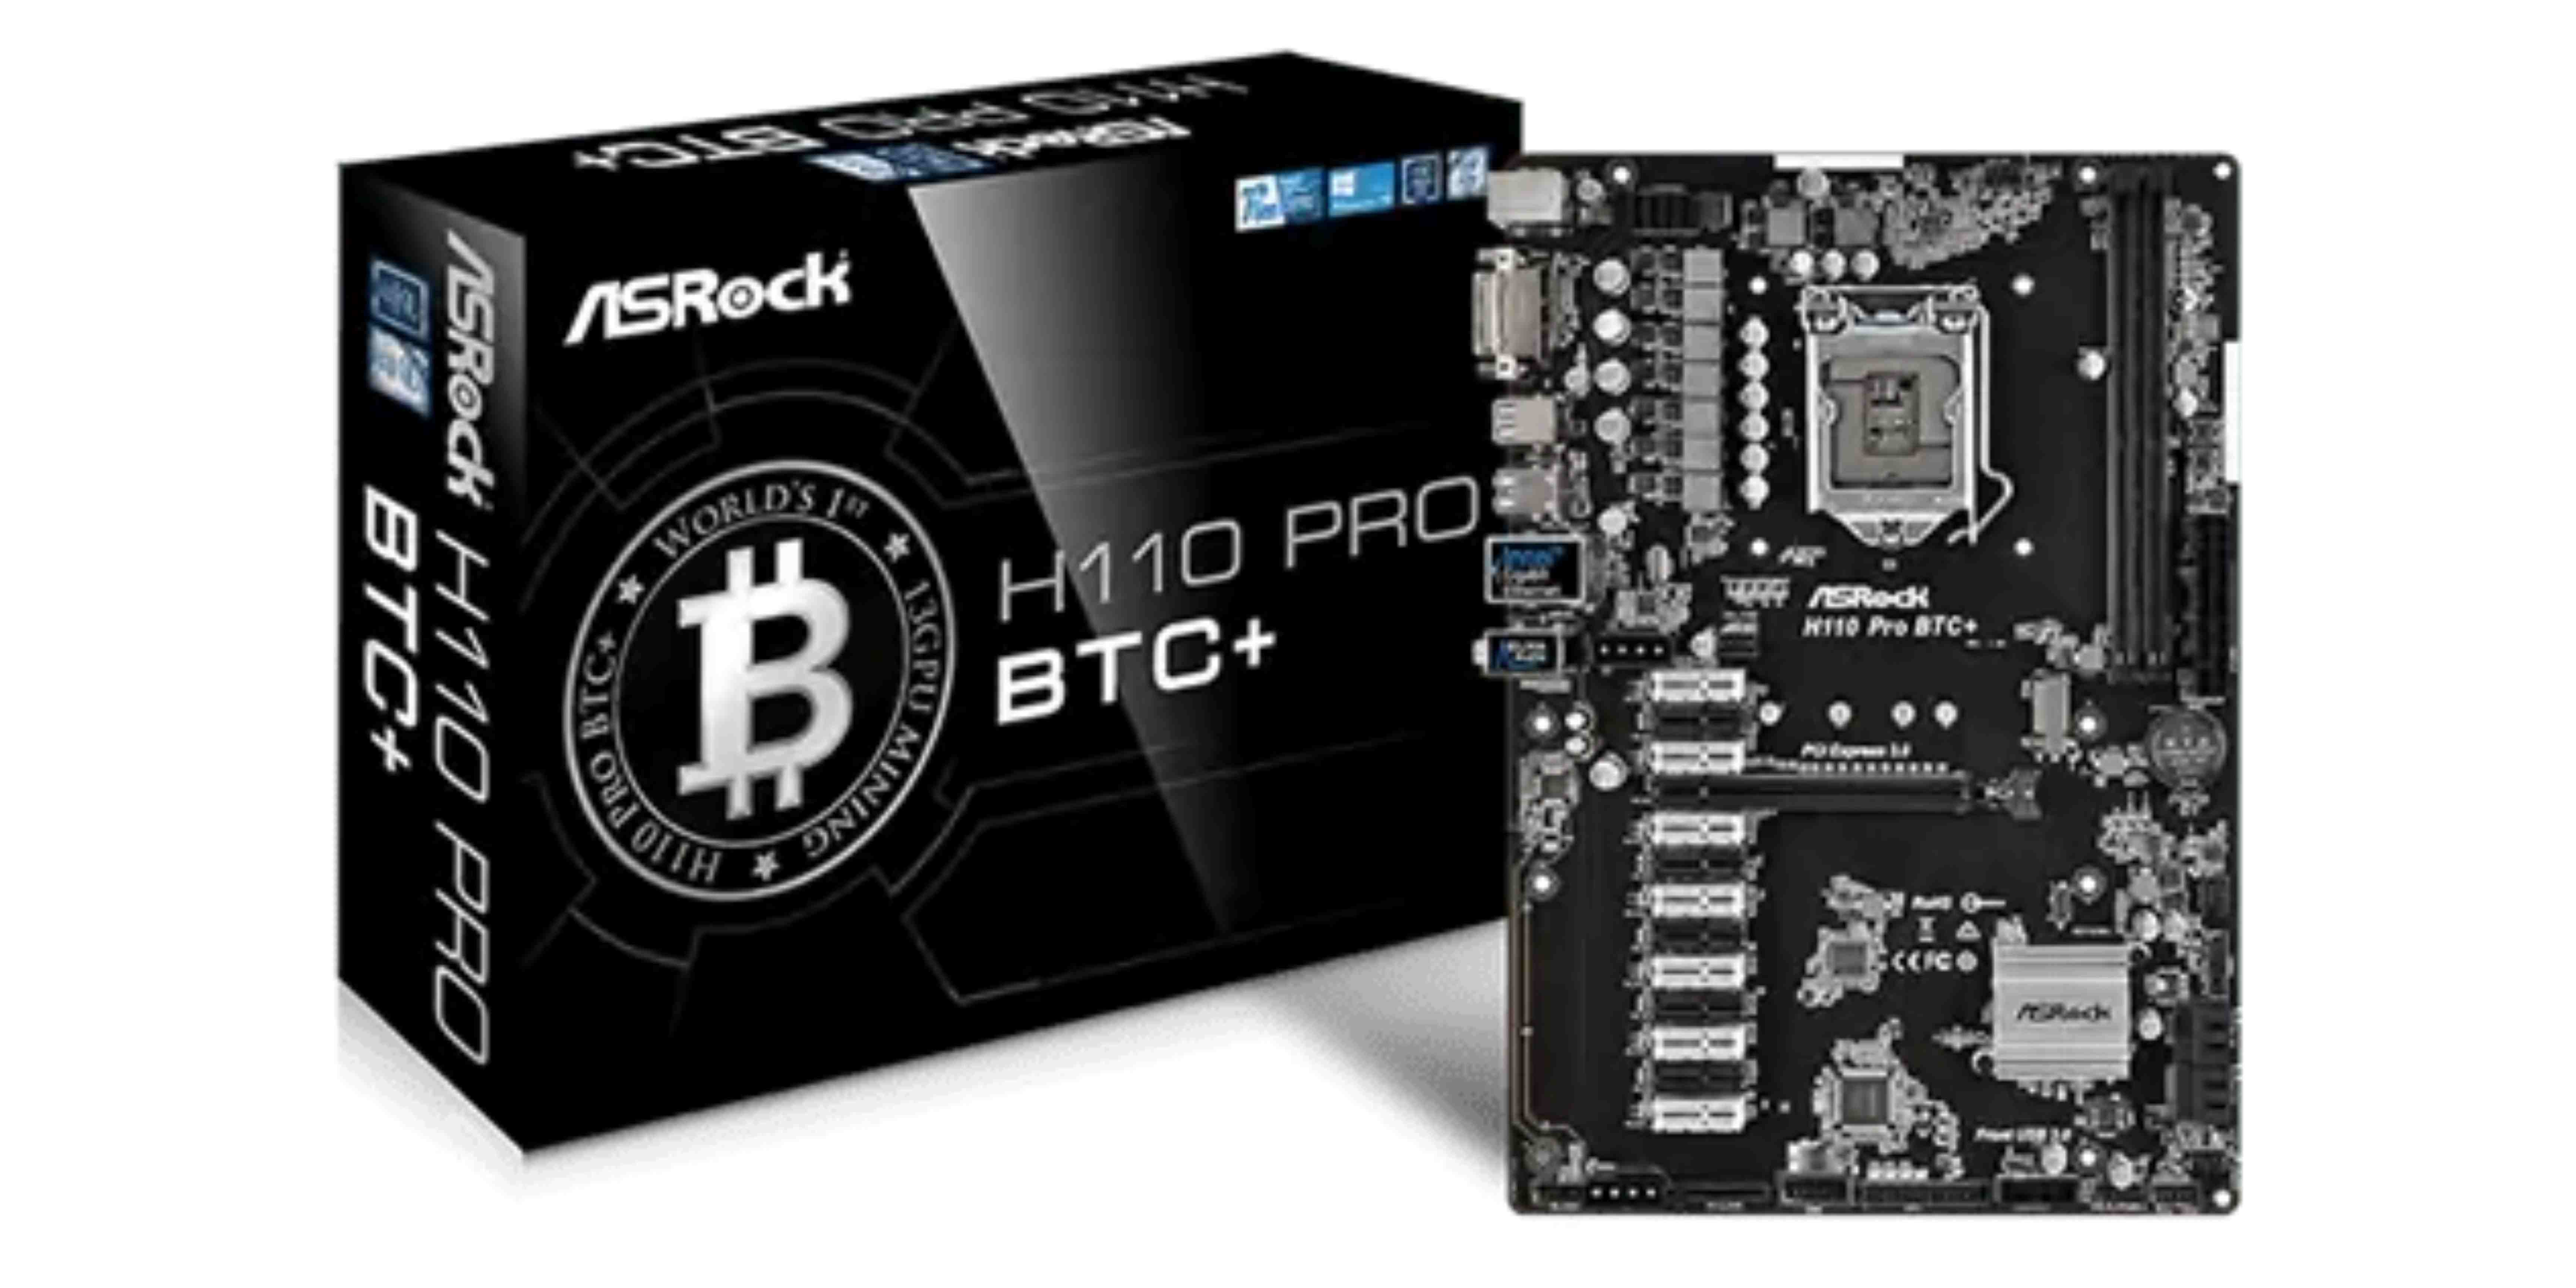 ASRock H110 Pro BTC+ with 13 graphic card slots